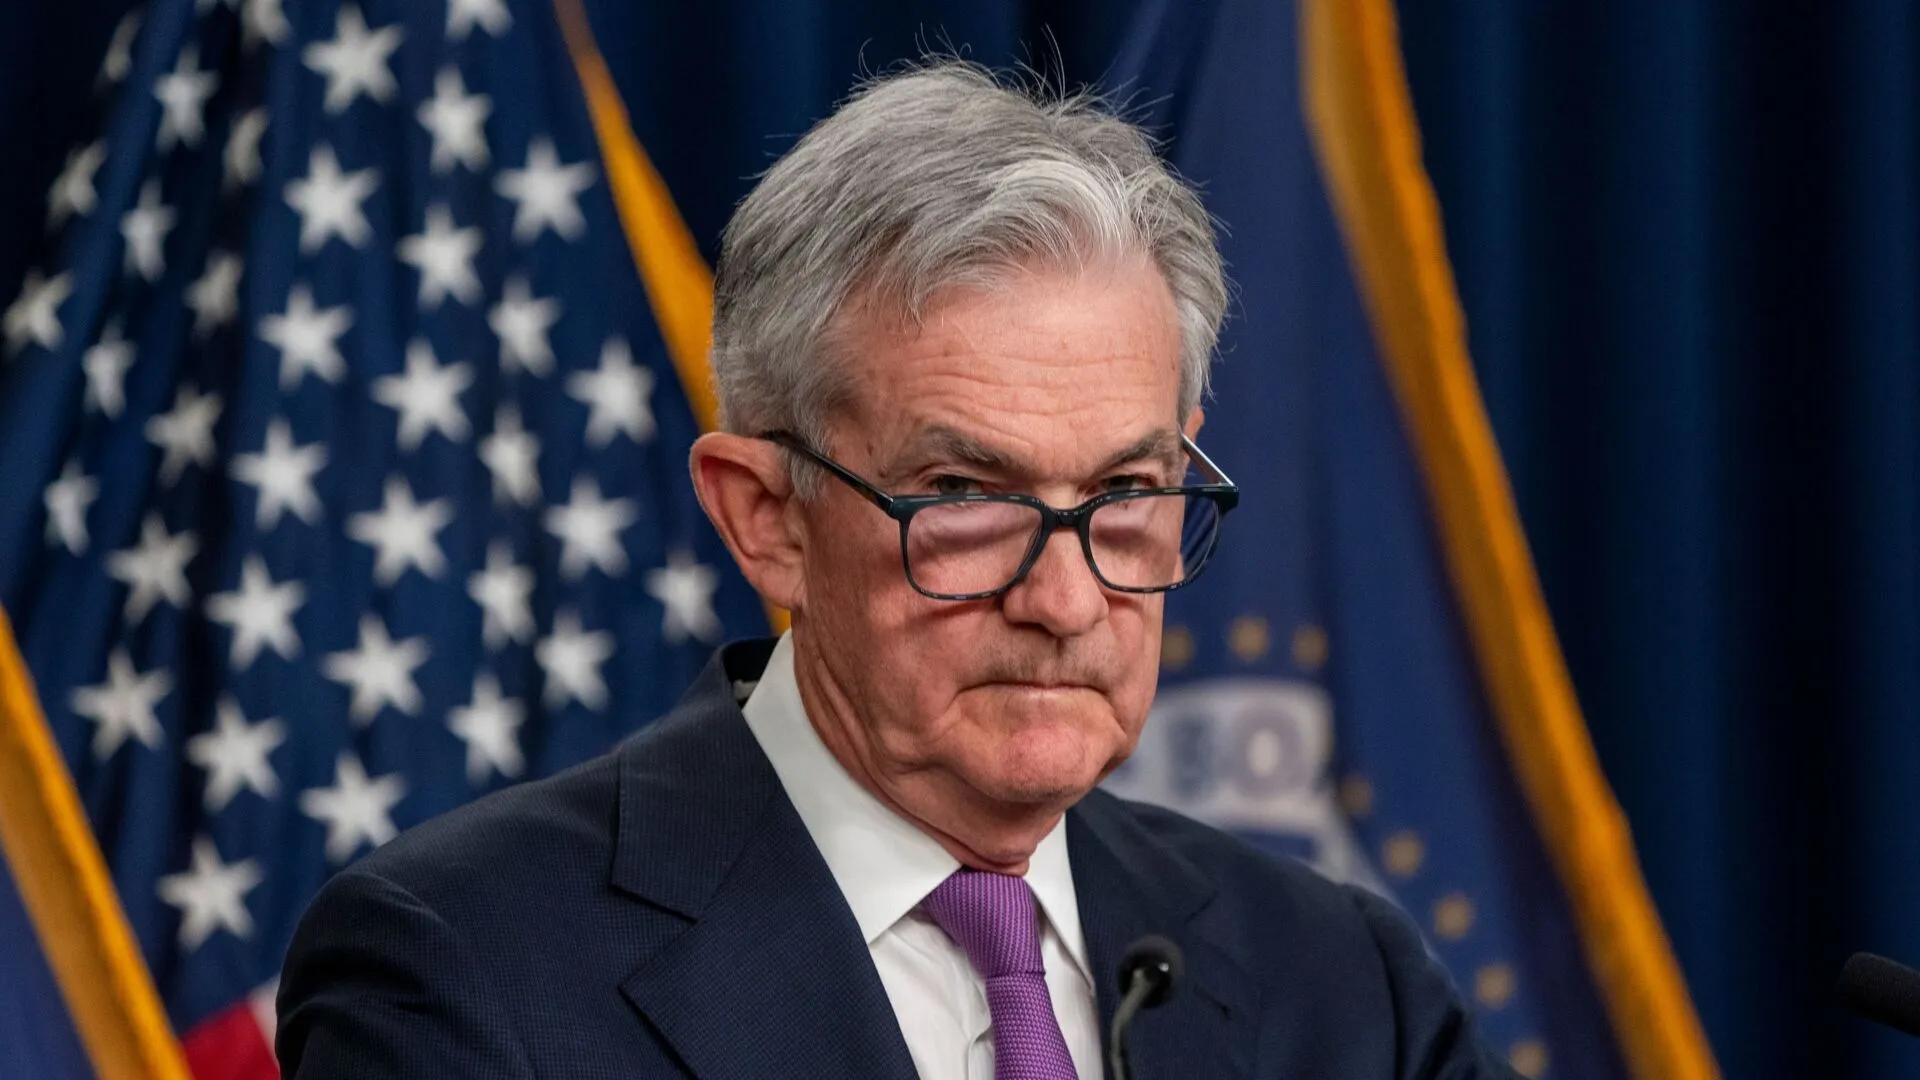 Mandatory Credit: Photo by SHAWN THEW/EPA-EFE/Shutterstock (14113319b)US Federal Reserve Board Chairman Jerome Powell looks on as he receives questions from the news media during a press conference at the Federal Reserve in Washington, DC, USA, 20 September 2023.